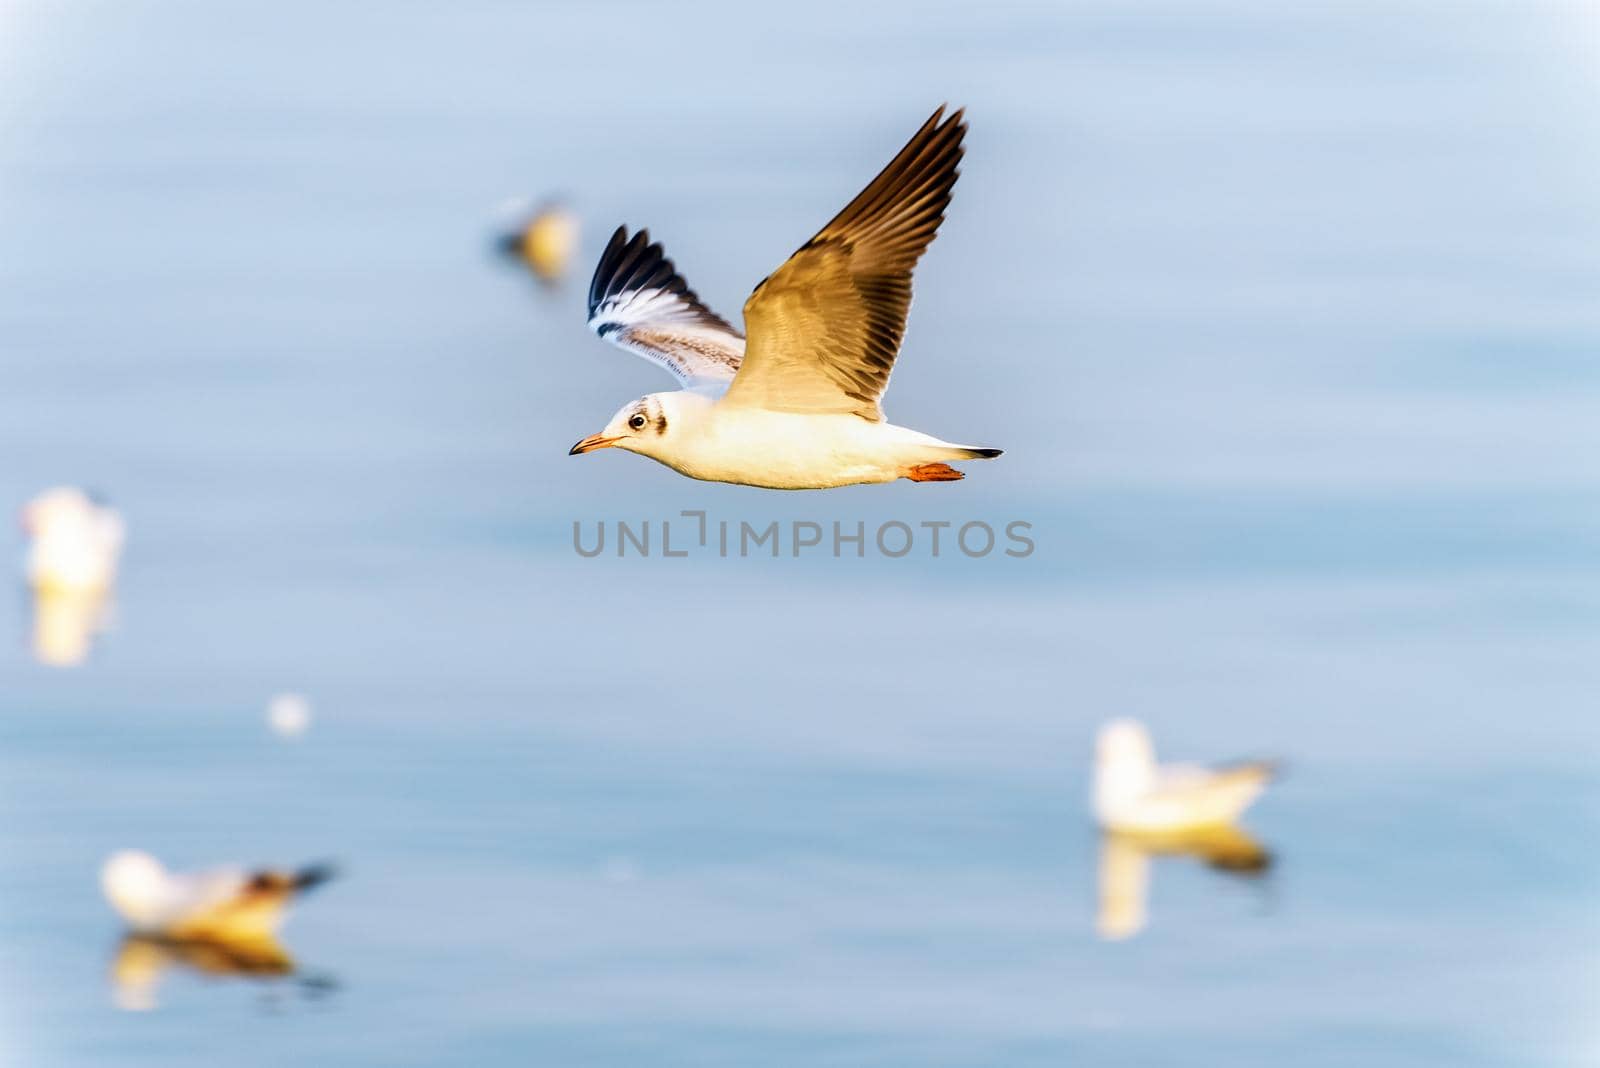 Animal in beautiful nature landscape for background, Closeup side view seagull bird flying happily on the blue sea in sunset, Bangpu Recreation Center famous tourist attraction, Samut Prakan, Thailand